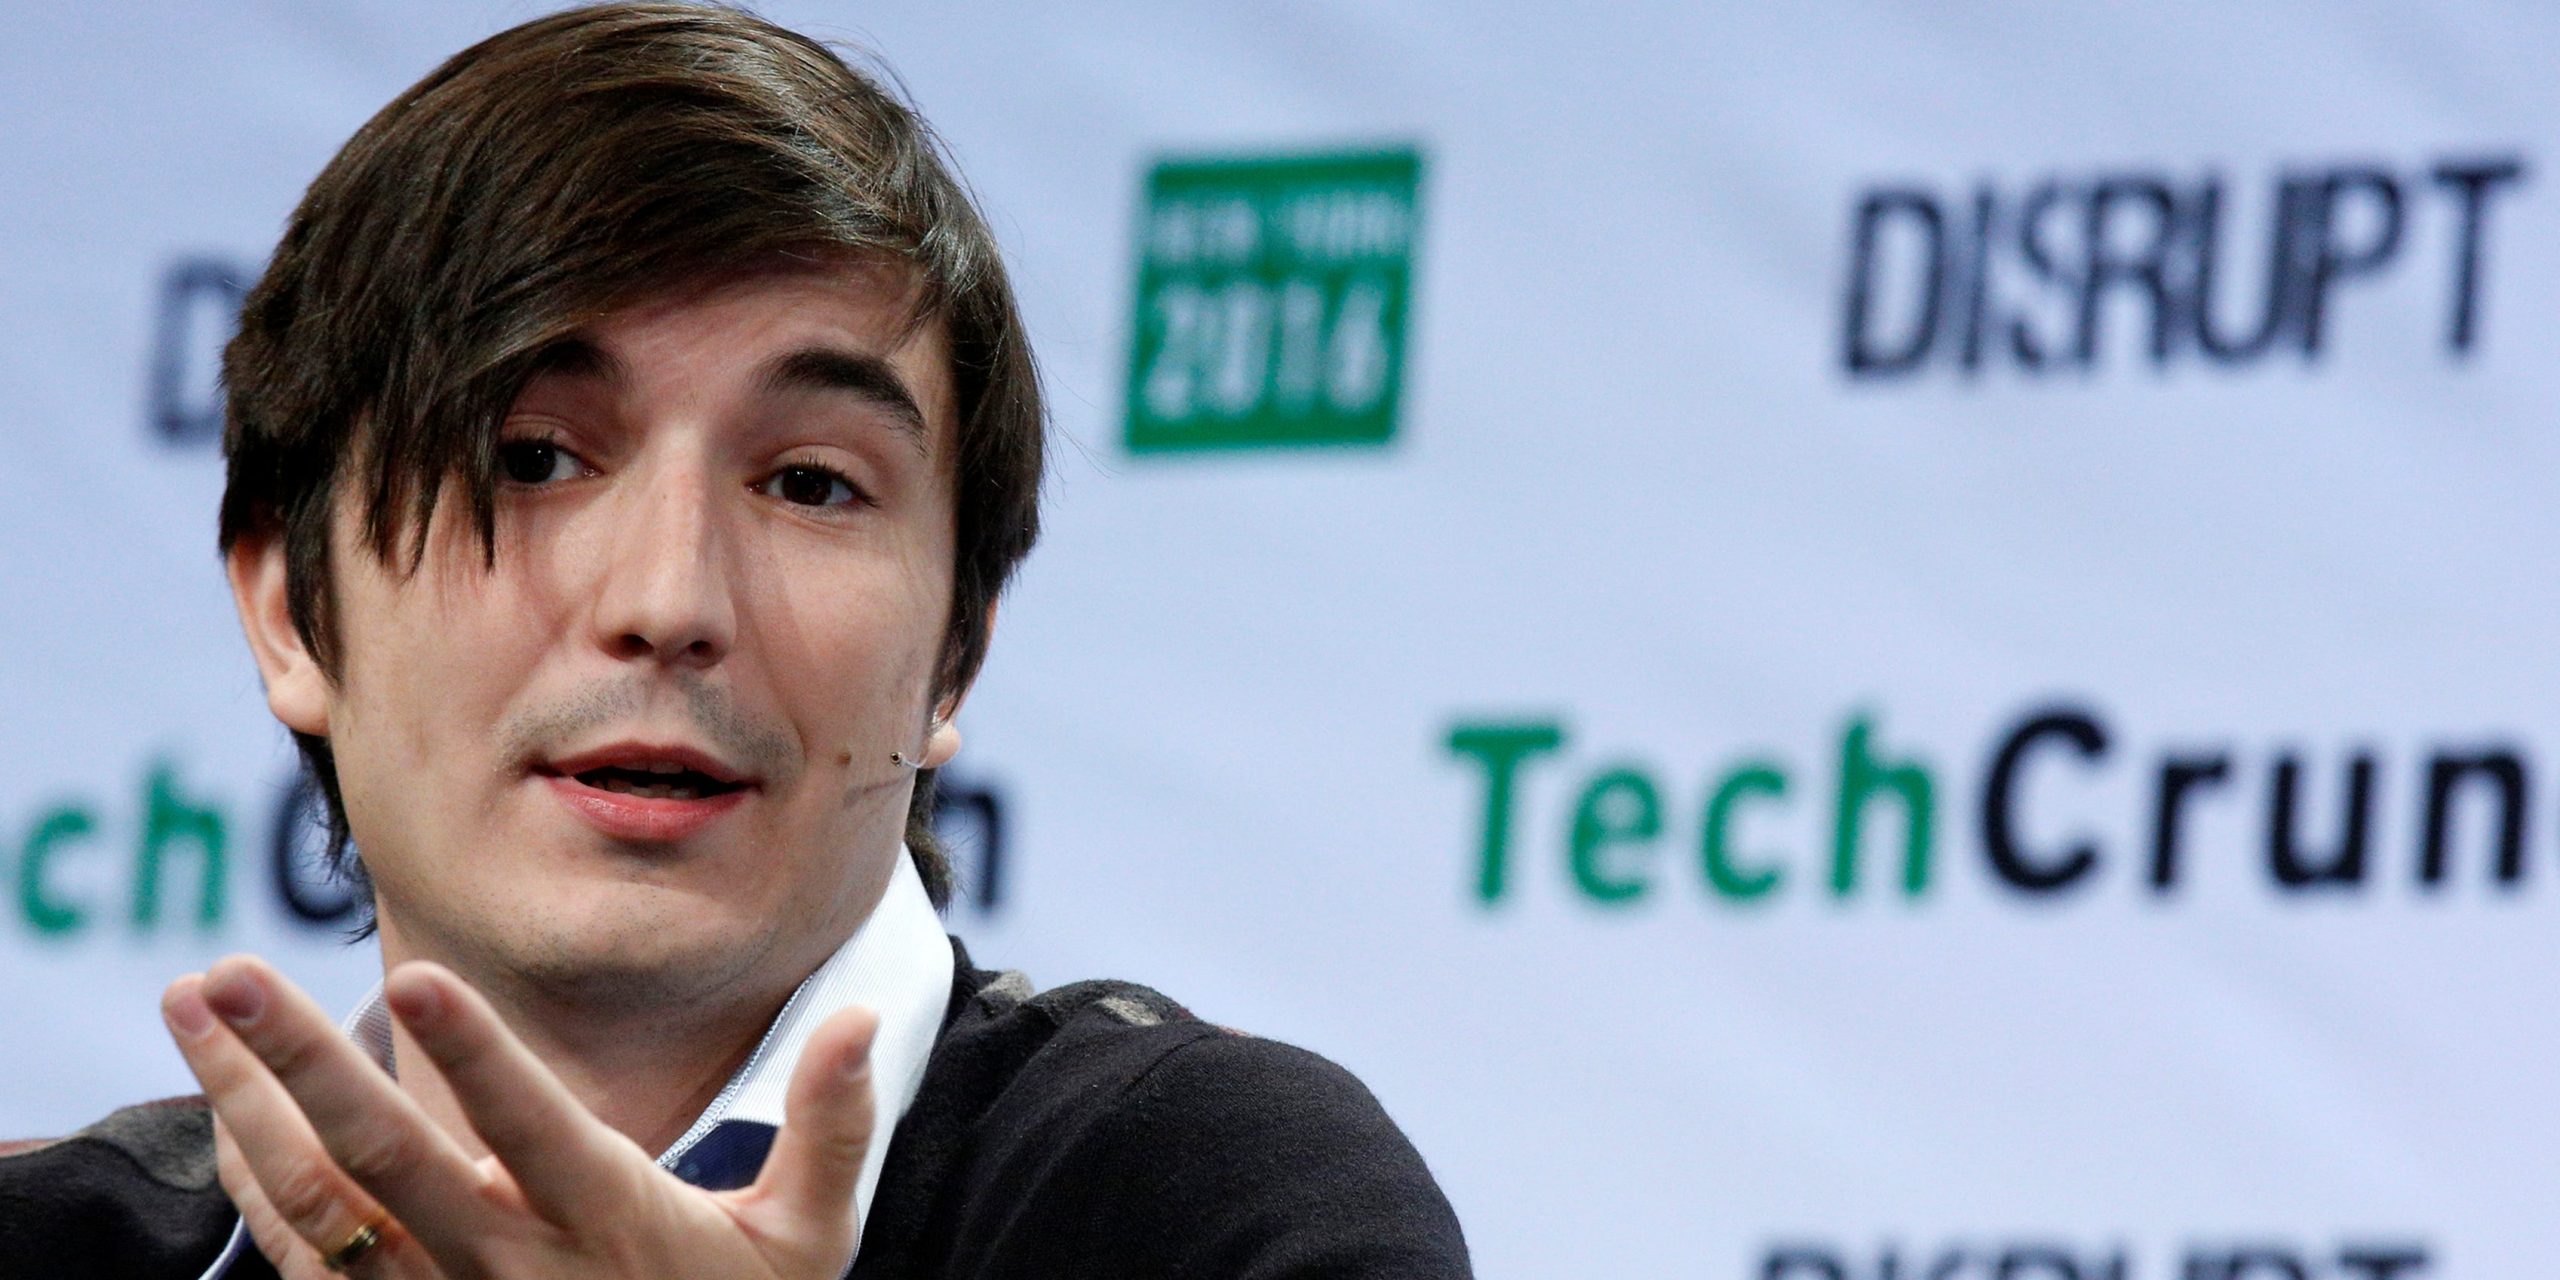 Robinhood just had another controversial week that frustrated users. Here’s what went down. | Markets – Business Insider